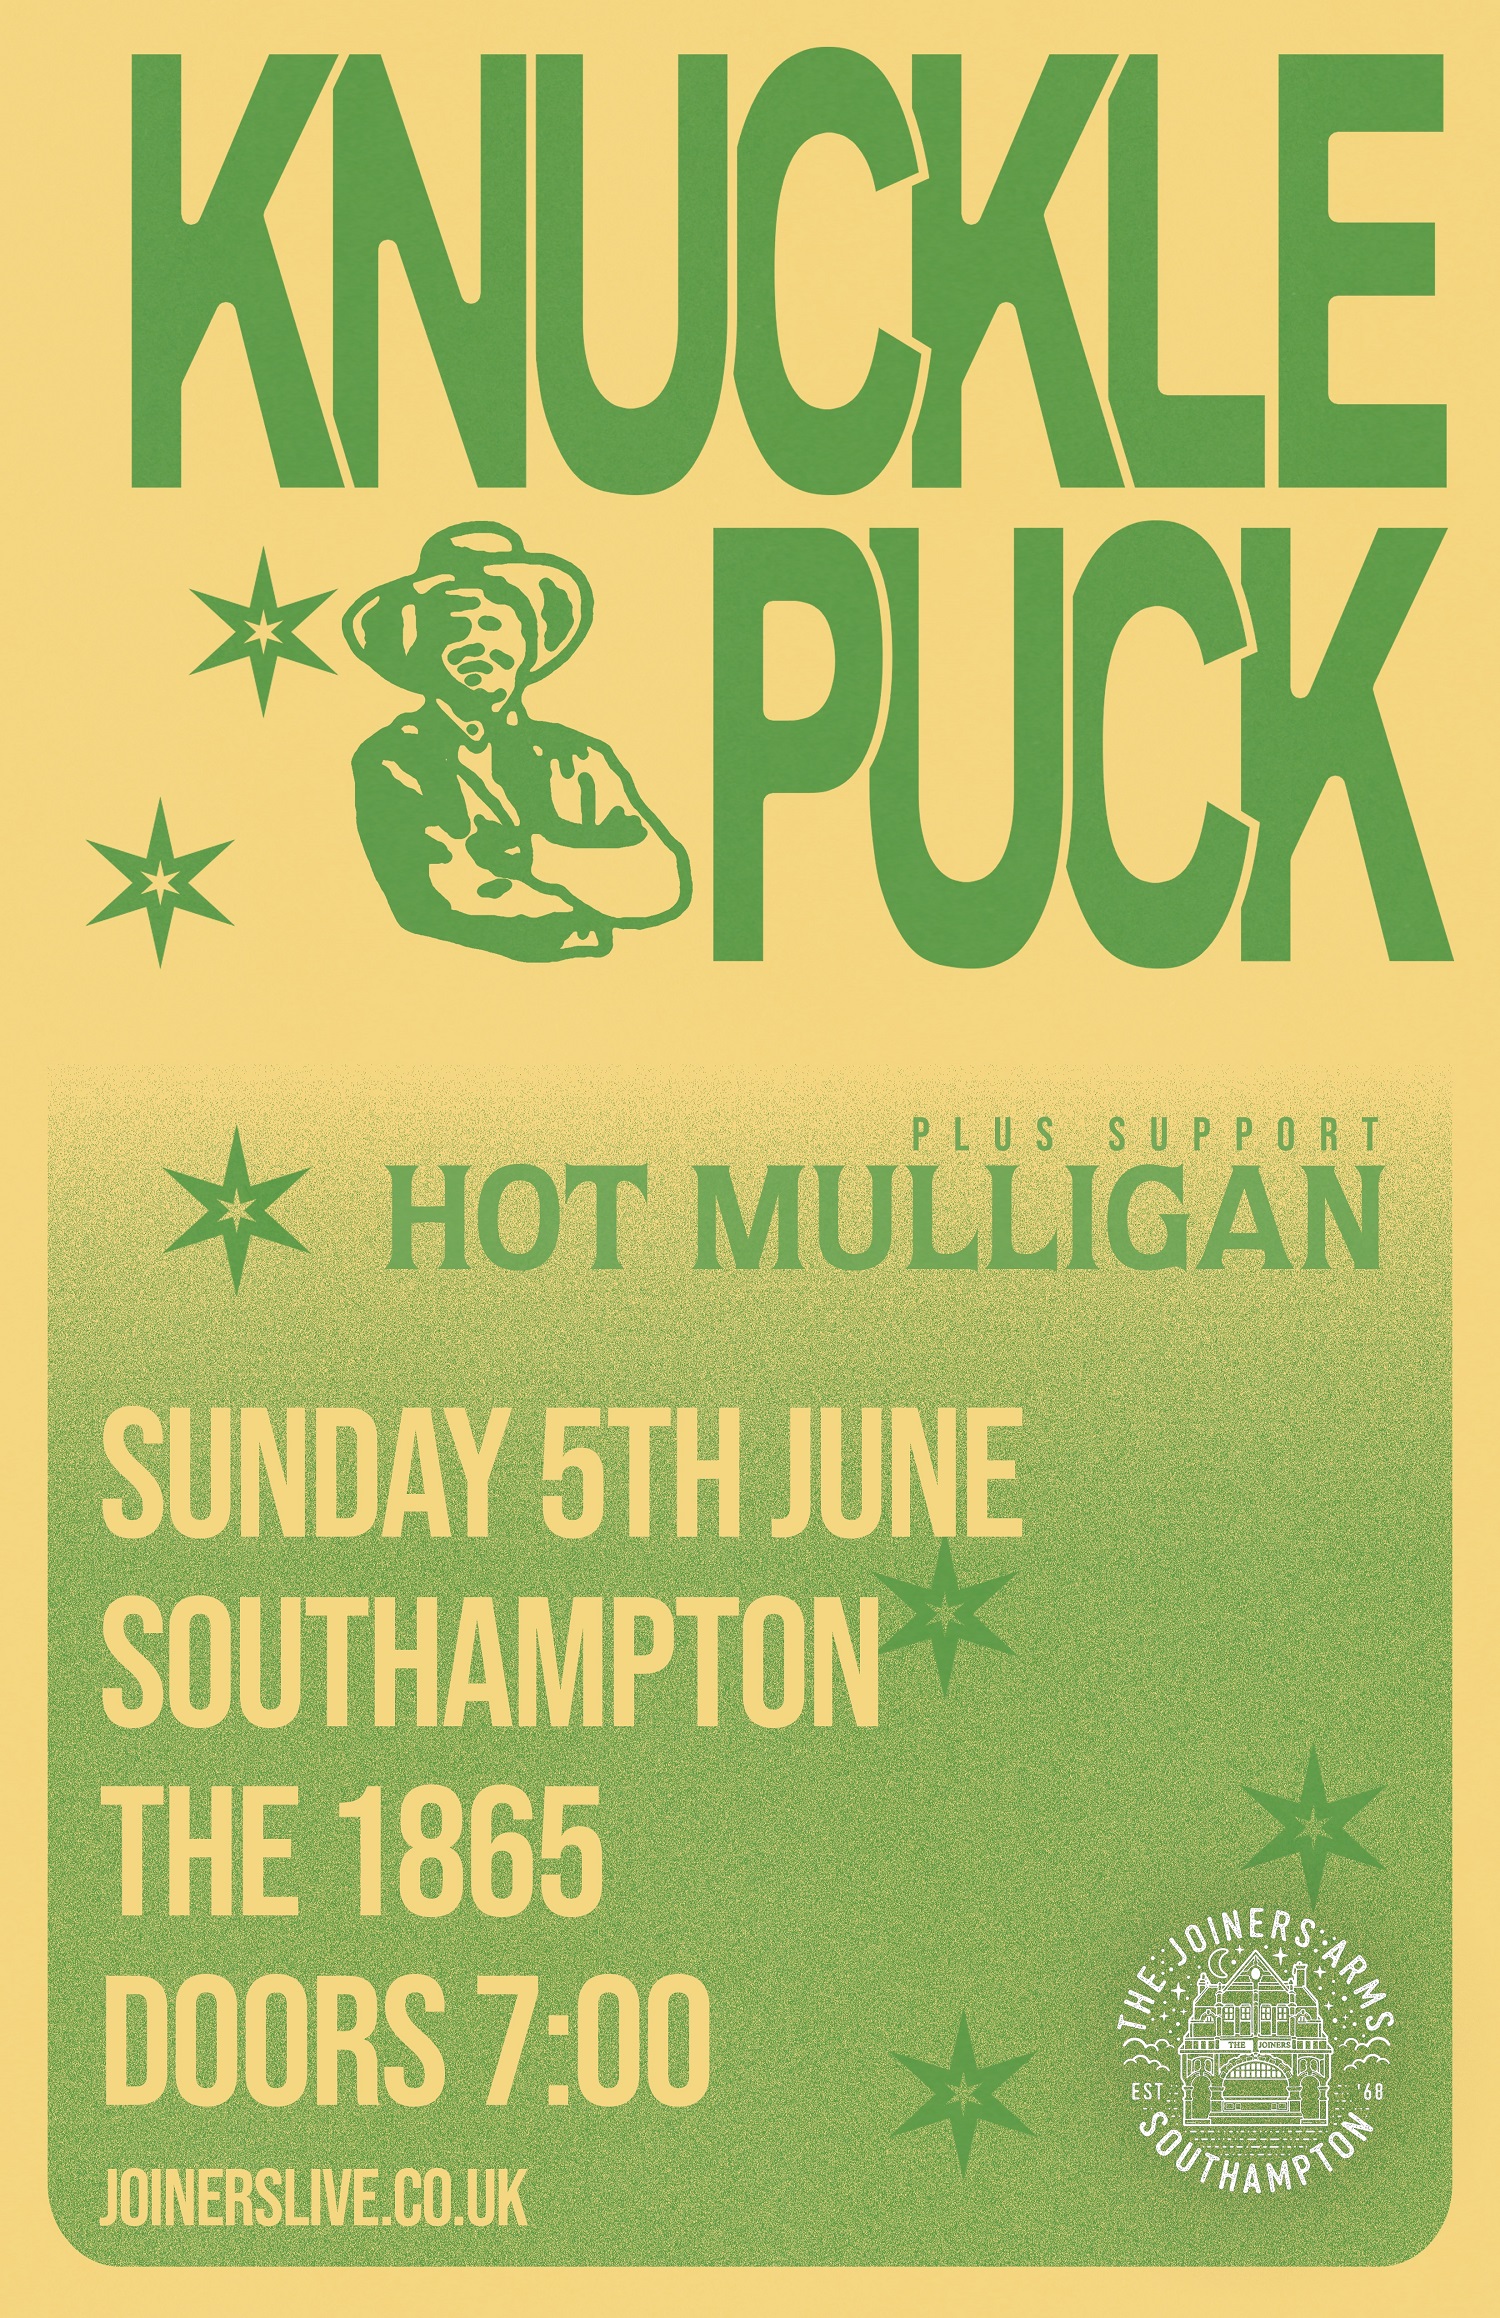 KNUCKLE PUCK + HOT MULLIGAN AT THE 1865